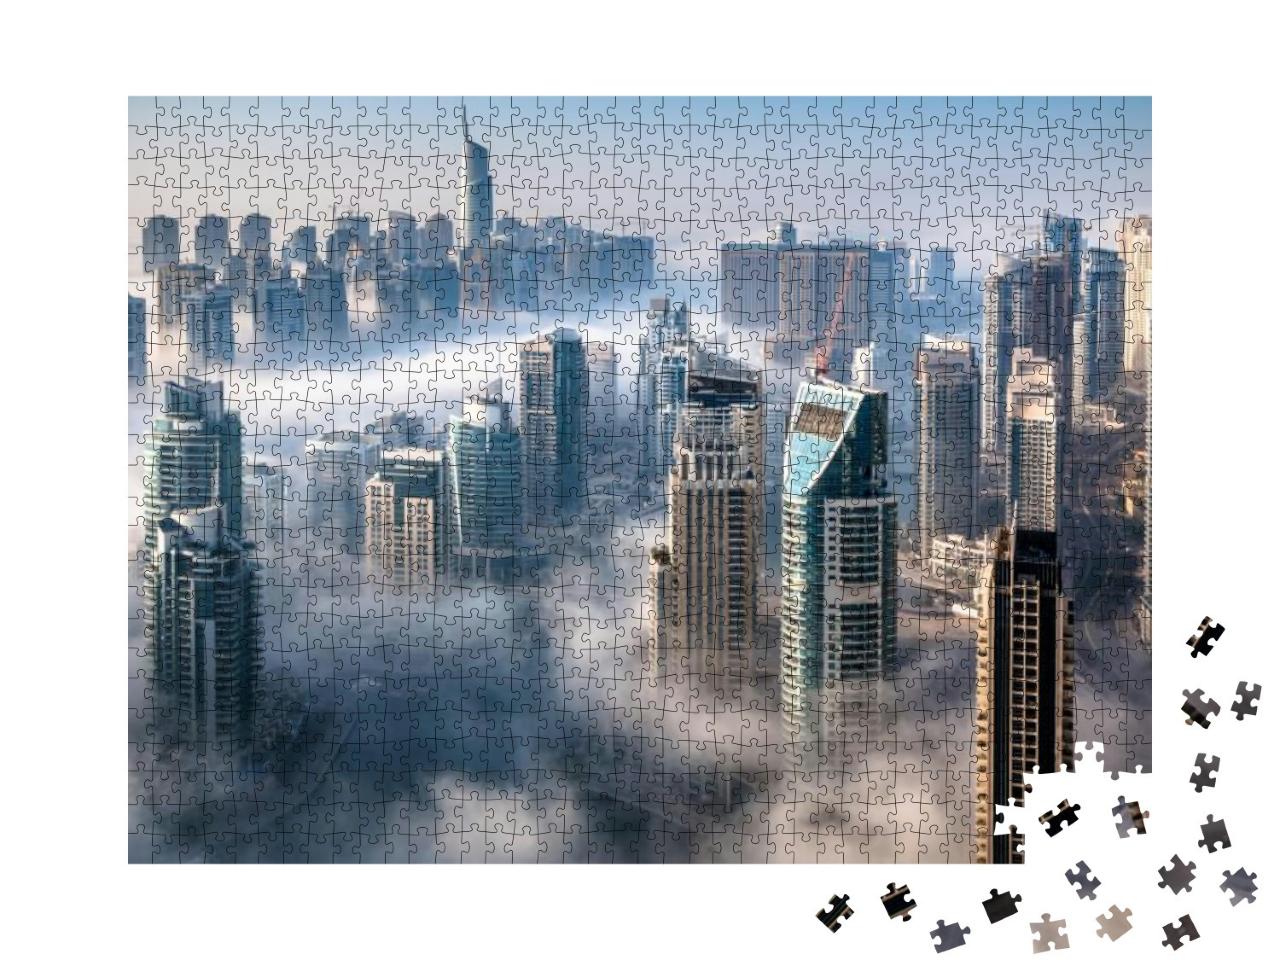 Dubai Skyline, an Impressive Aerial Top View of the City... Jigsaw Puzzle with 1000 pieces